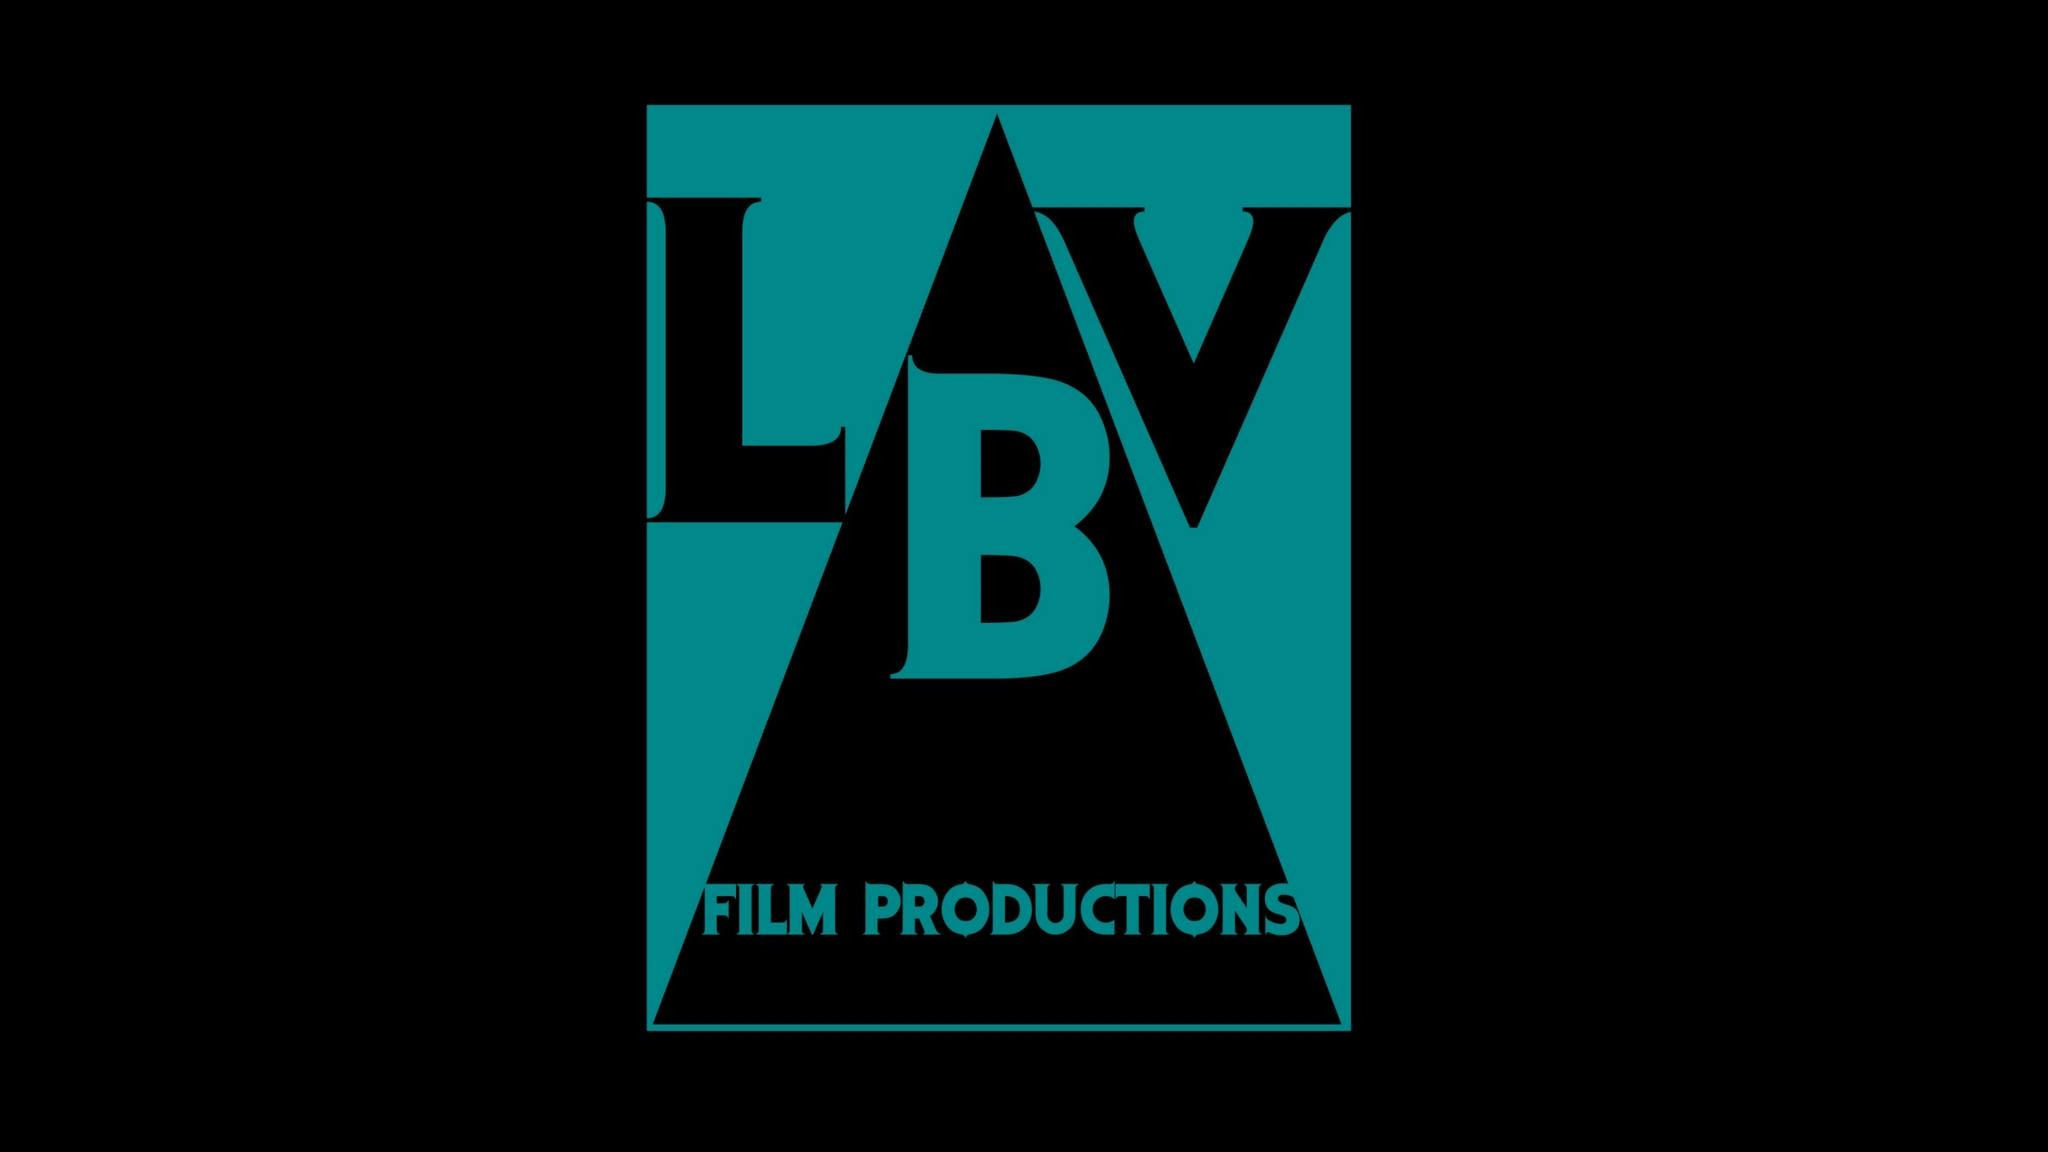 LBV PRODUCTIONS